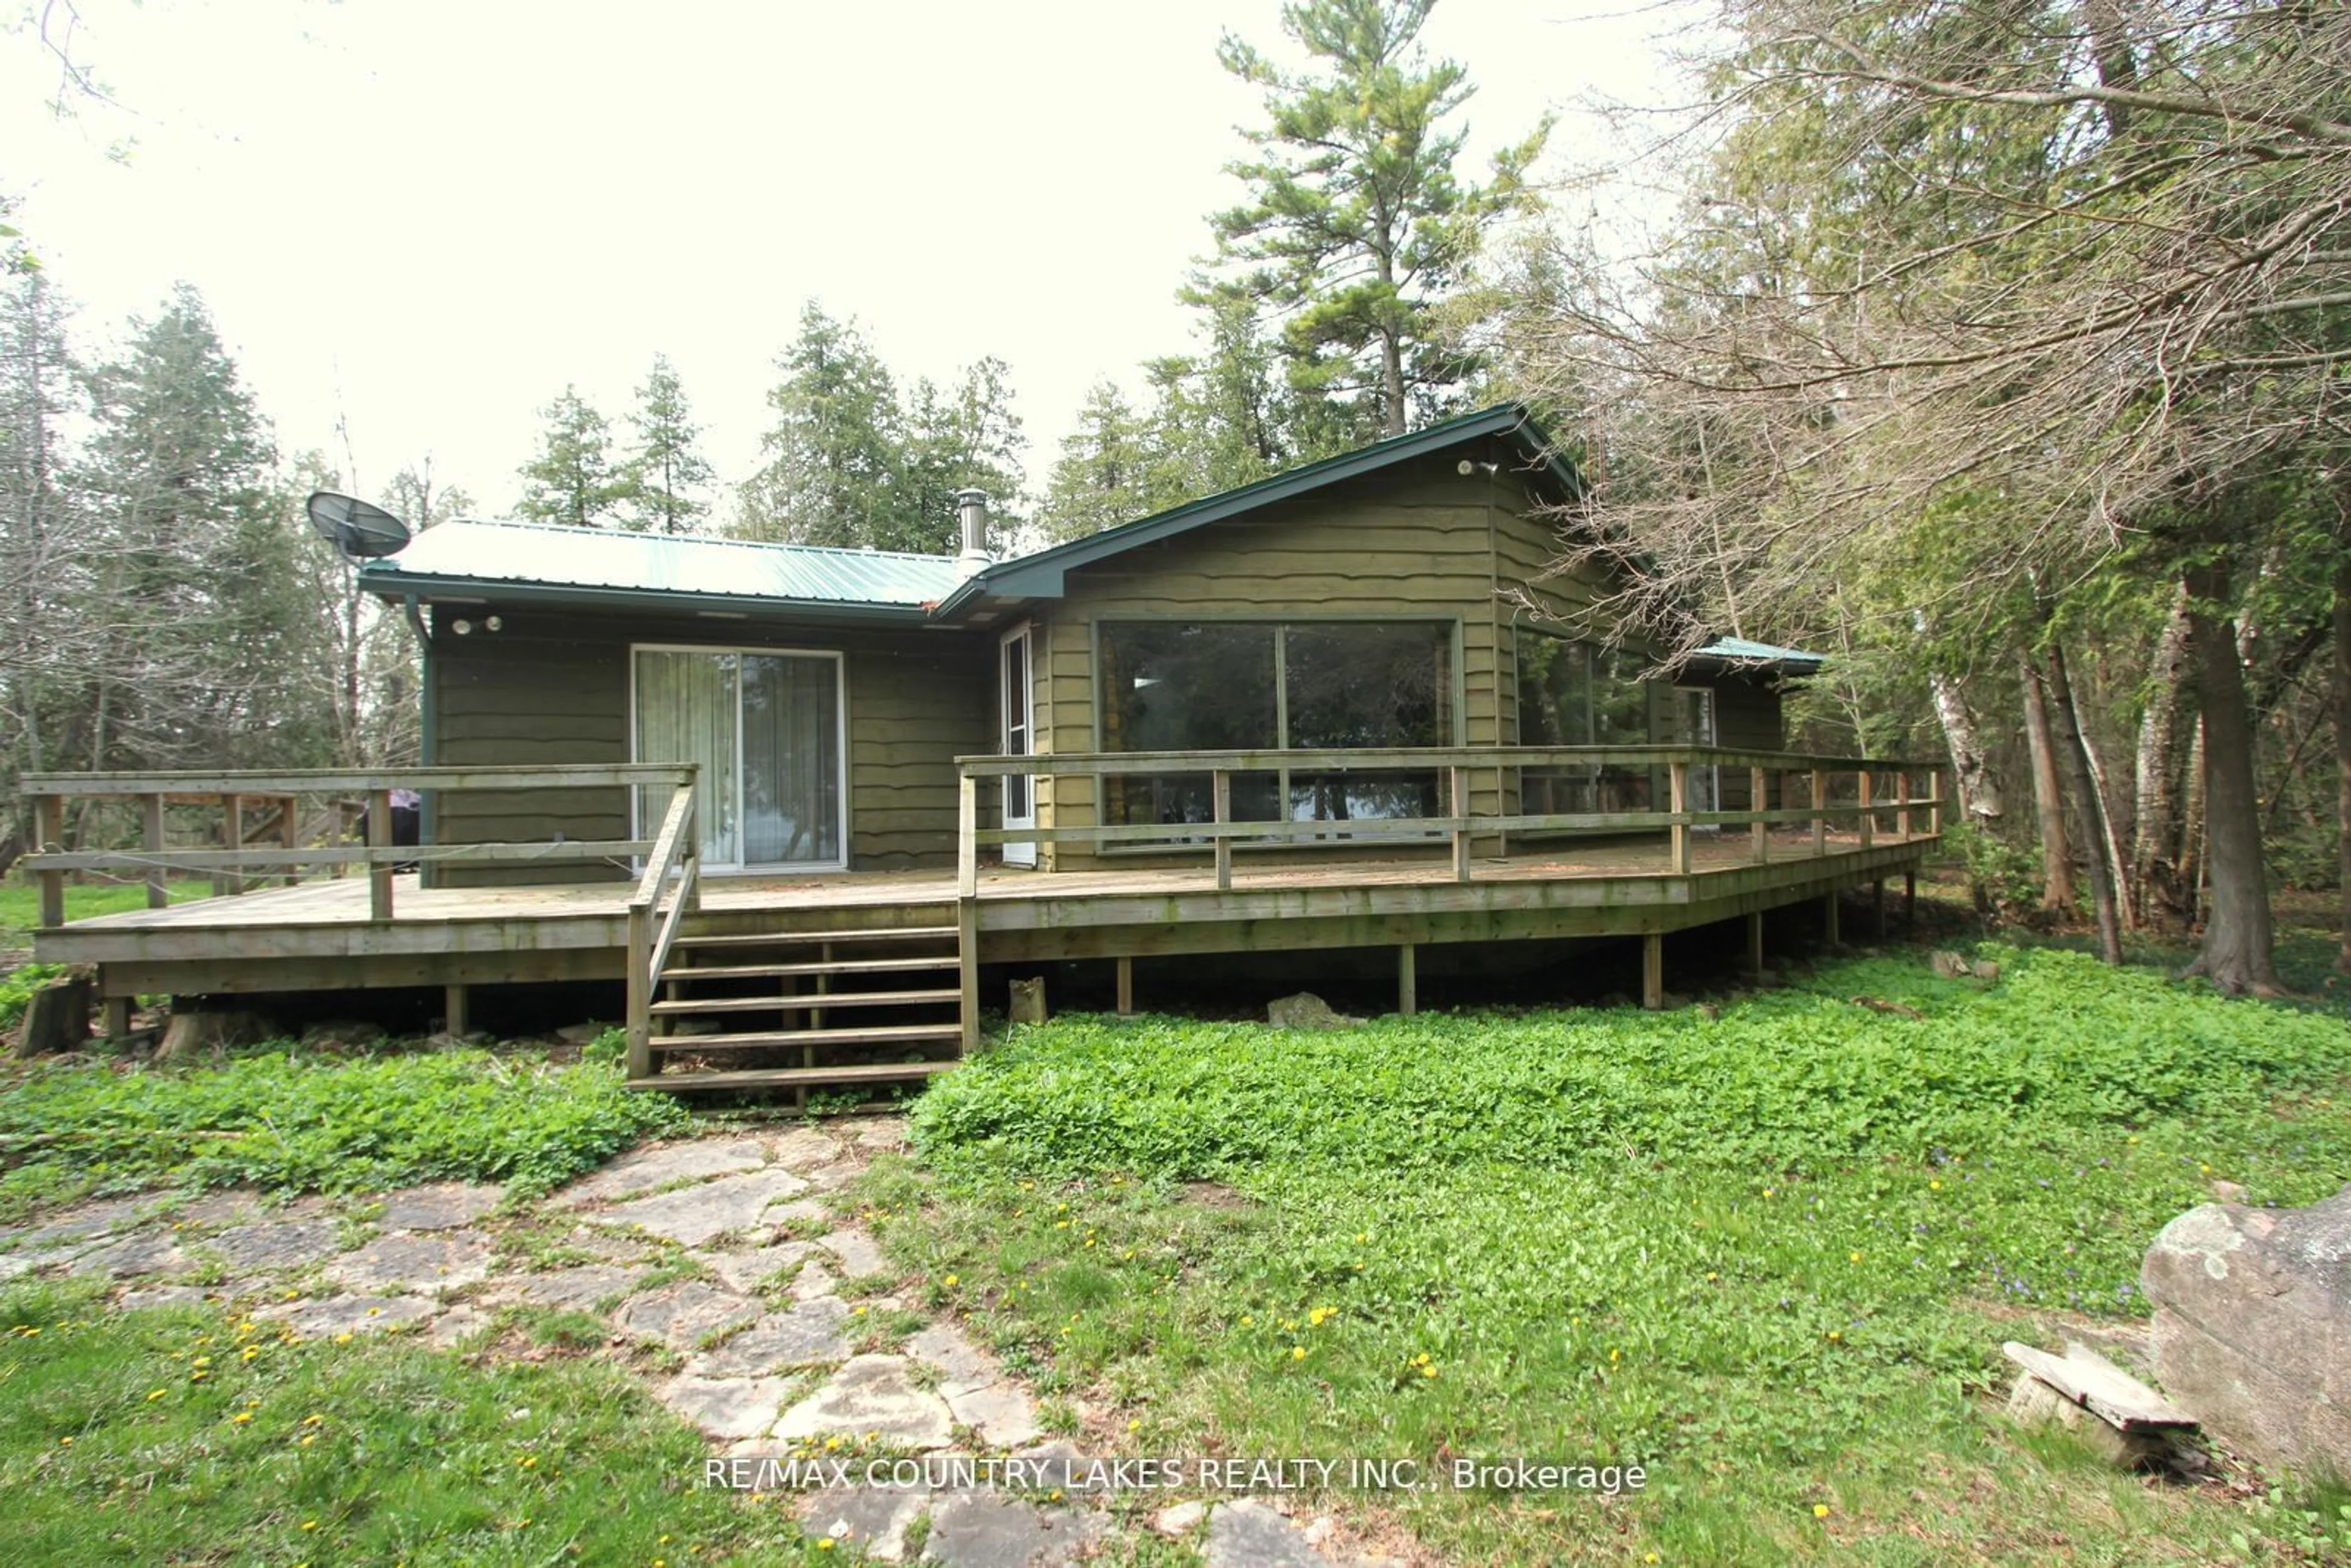 Cottage for B40440 Shore Rd, Brock Ontario L0K 1A0